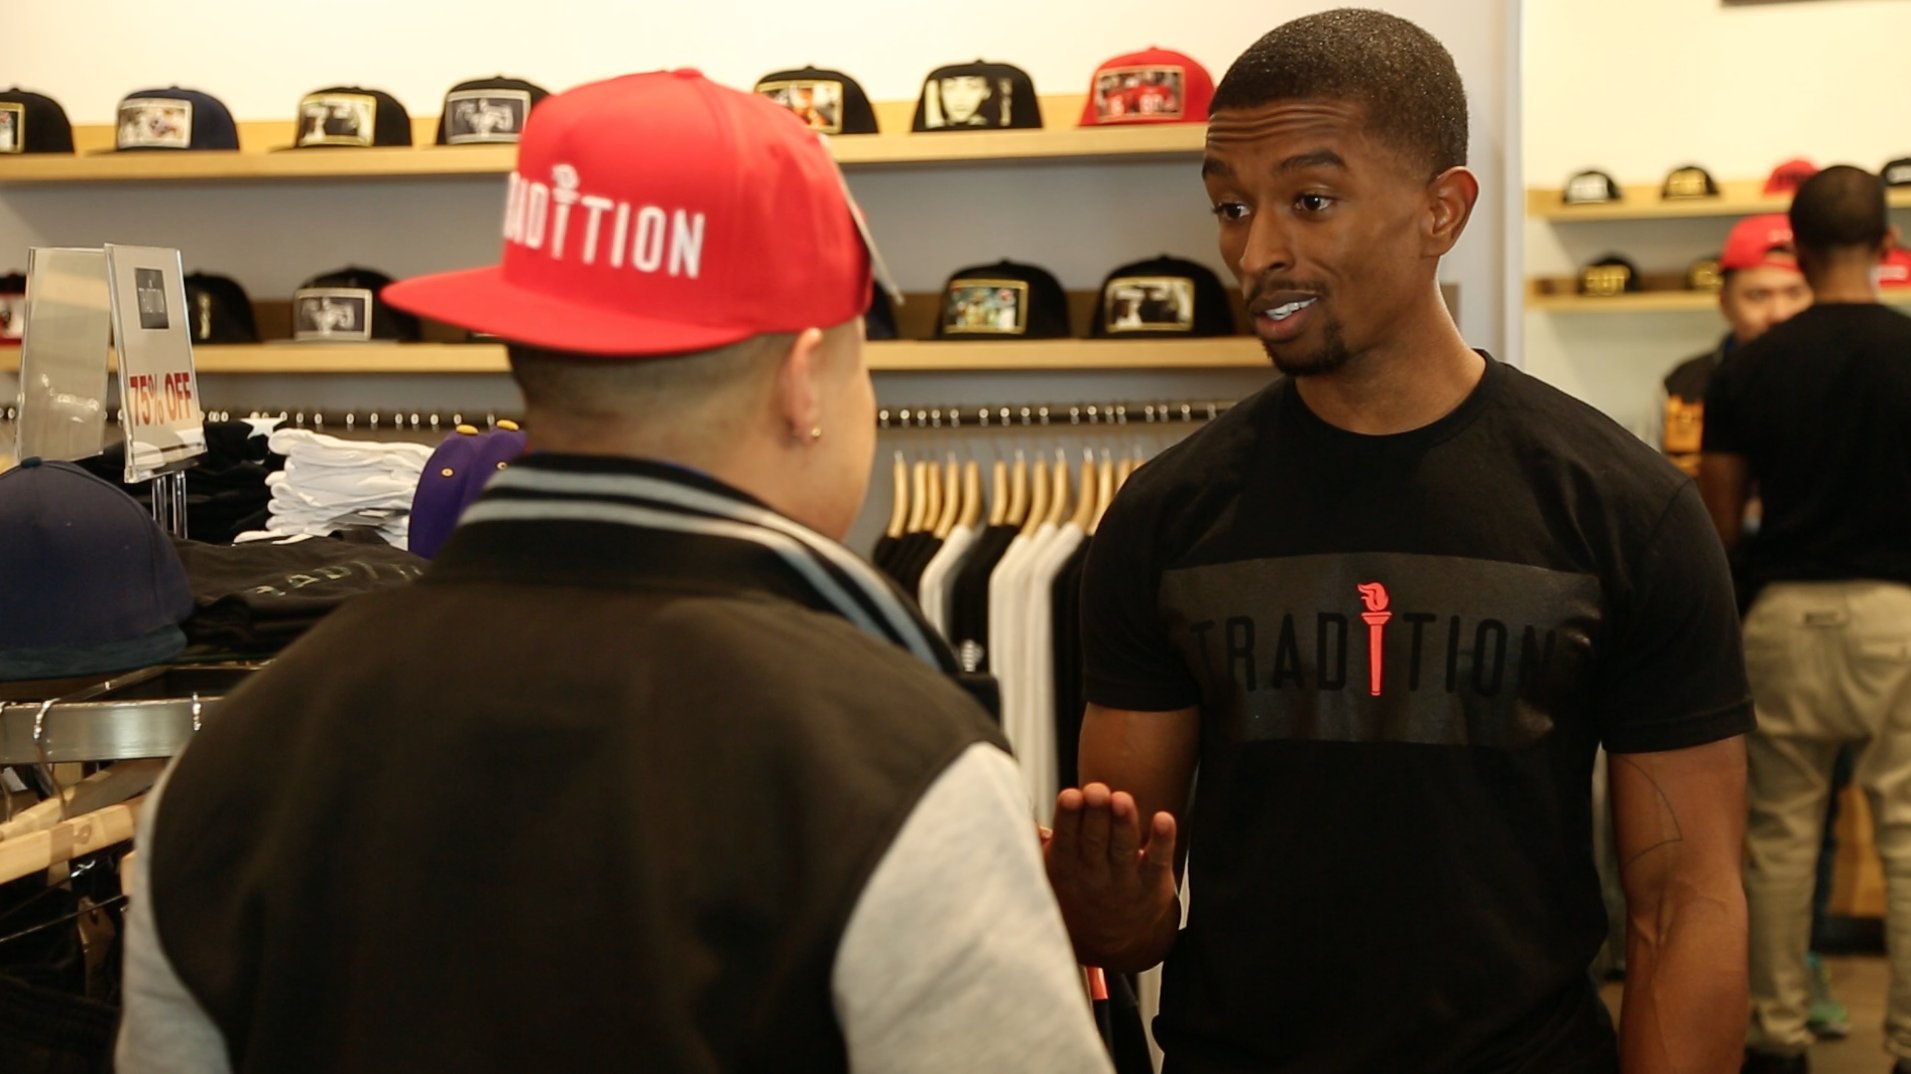 Kevin L. Walker and Timothy DelaGhetto in Retail (2014)